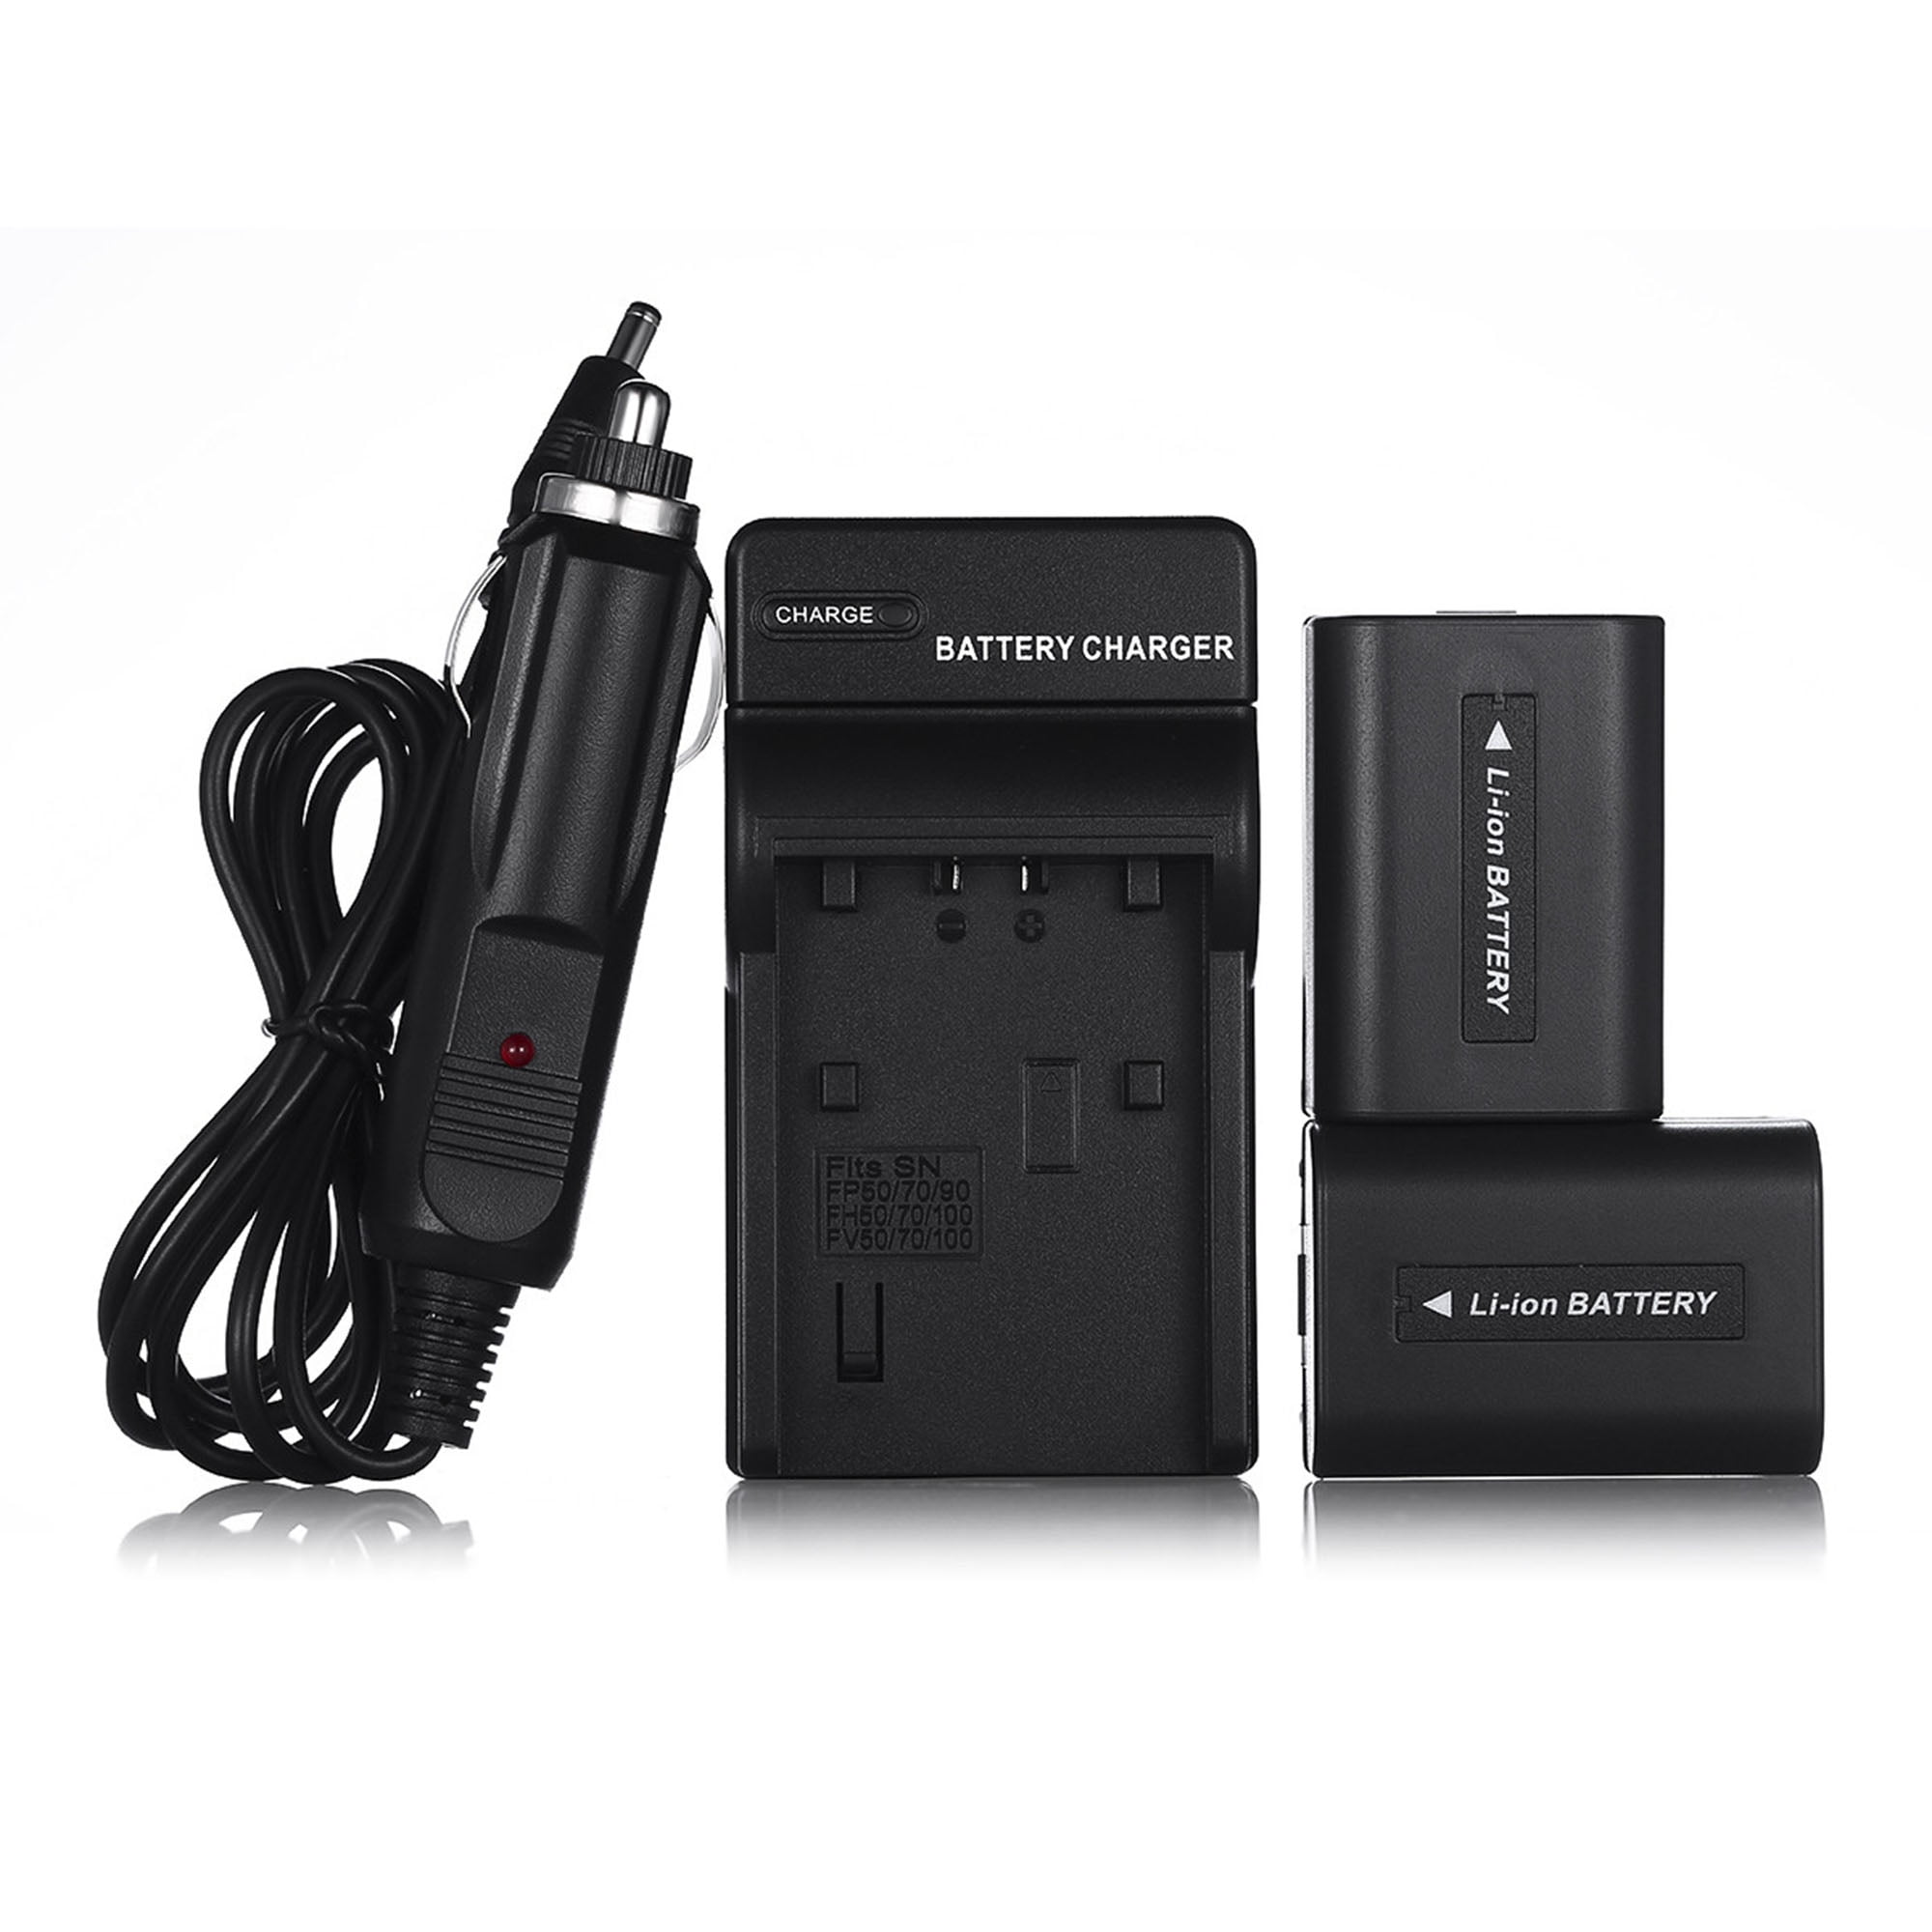 Cameron Sino Rechargeble Battery for Sony Alpha DSLR-A500Y 